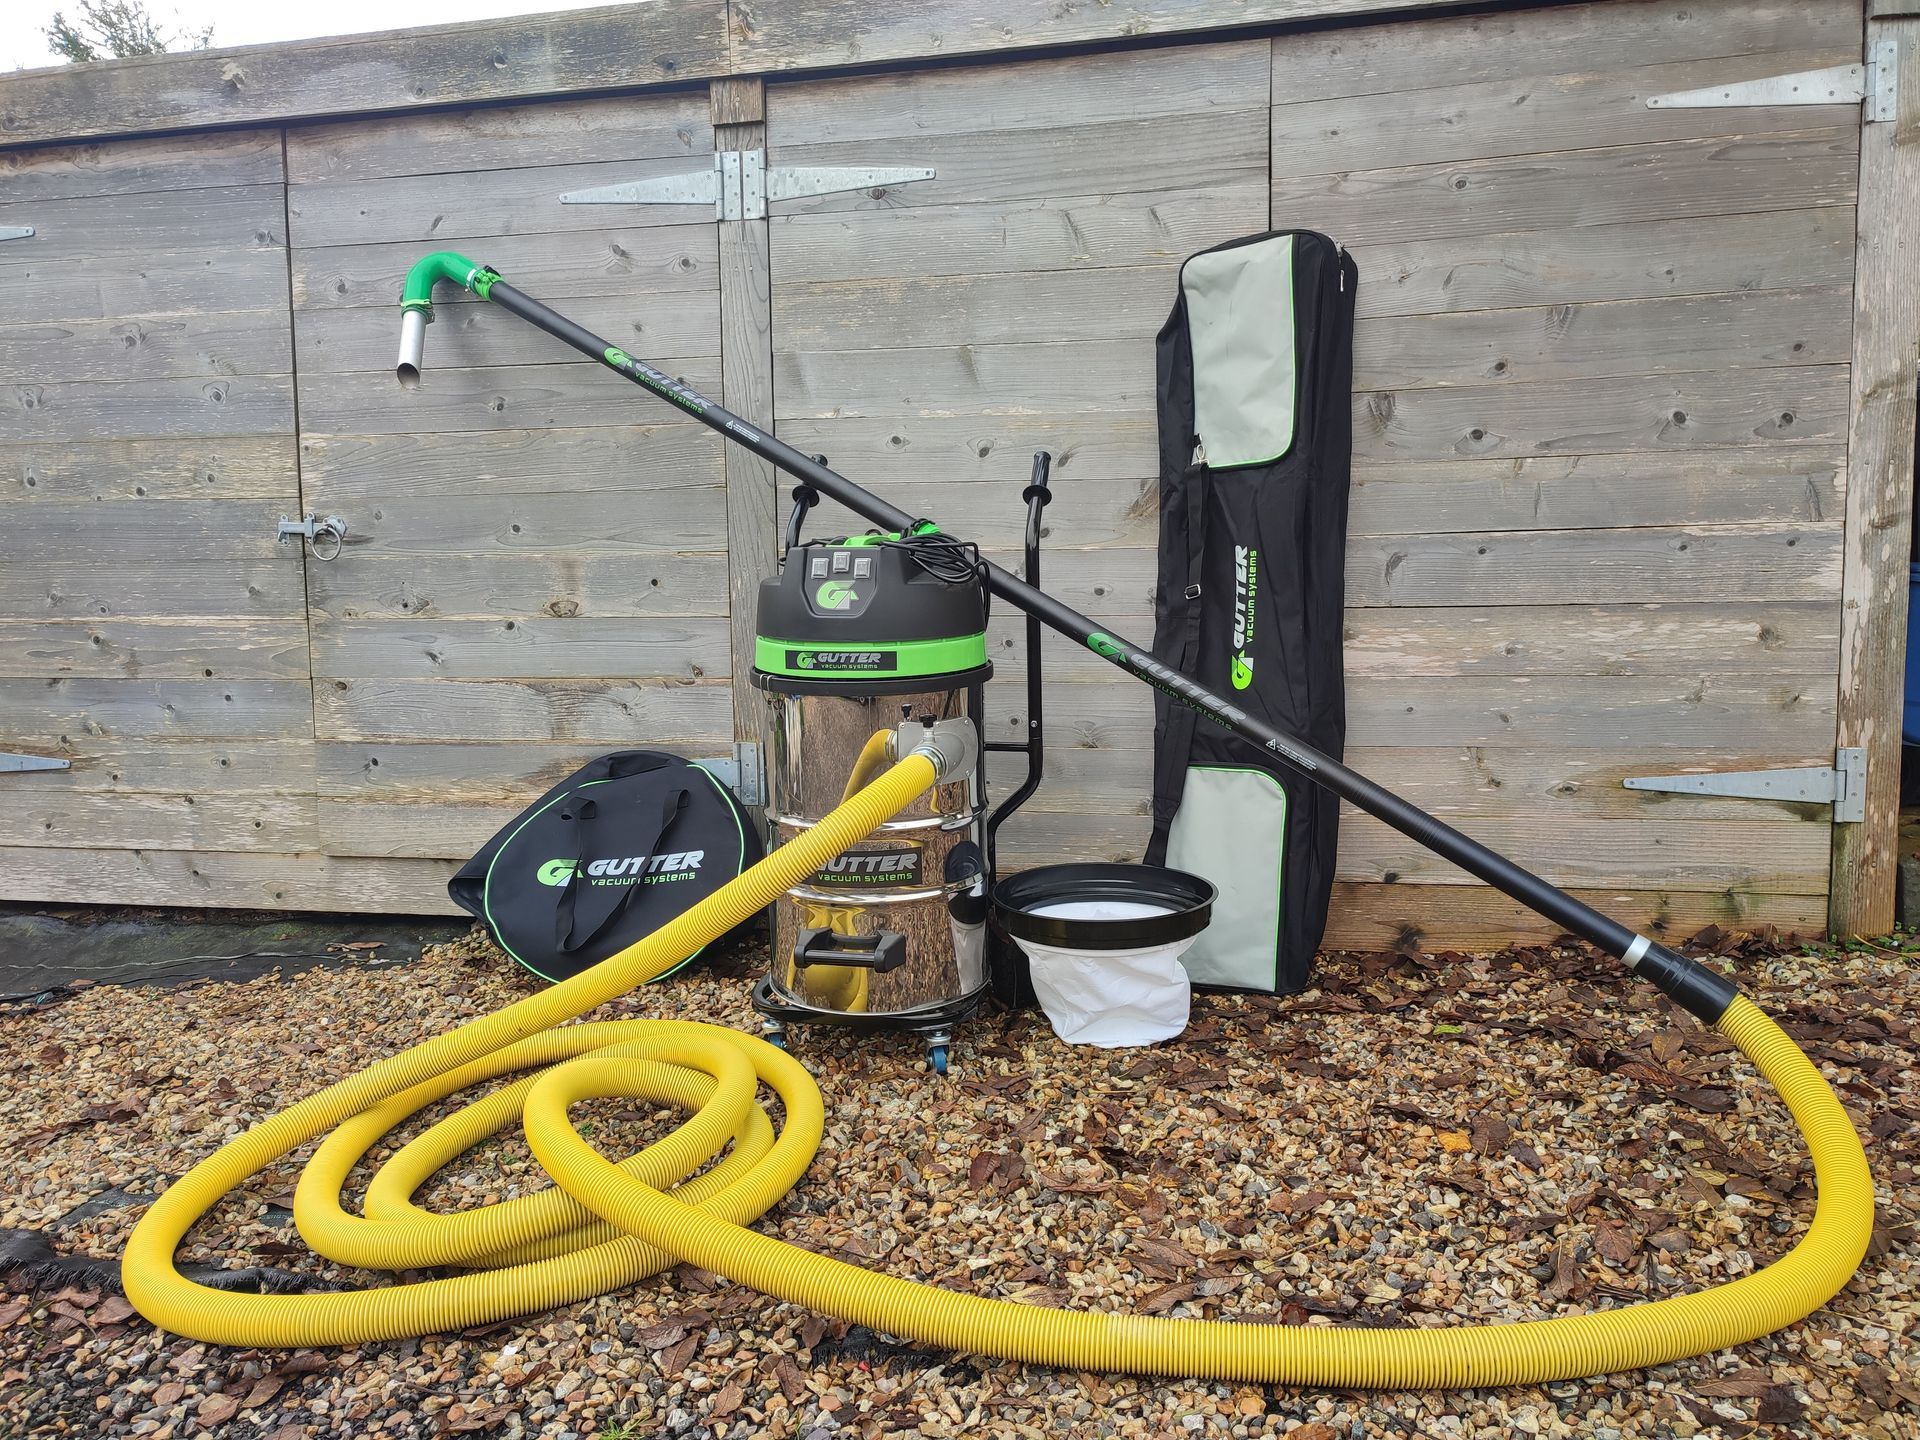 GVS-3600 gutter vacuum, carbon fibre clamped poles, with carry bags and yellow hose